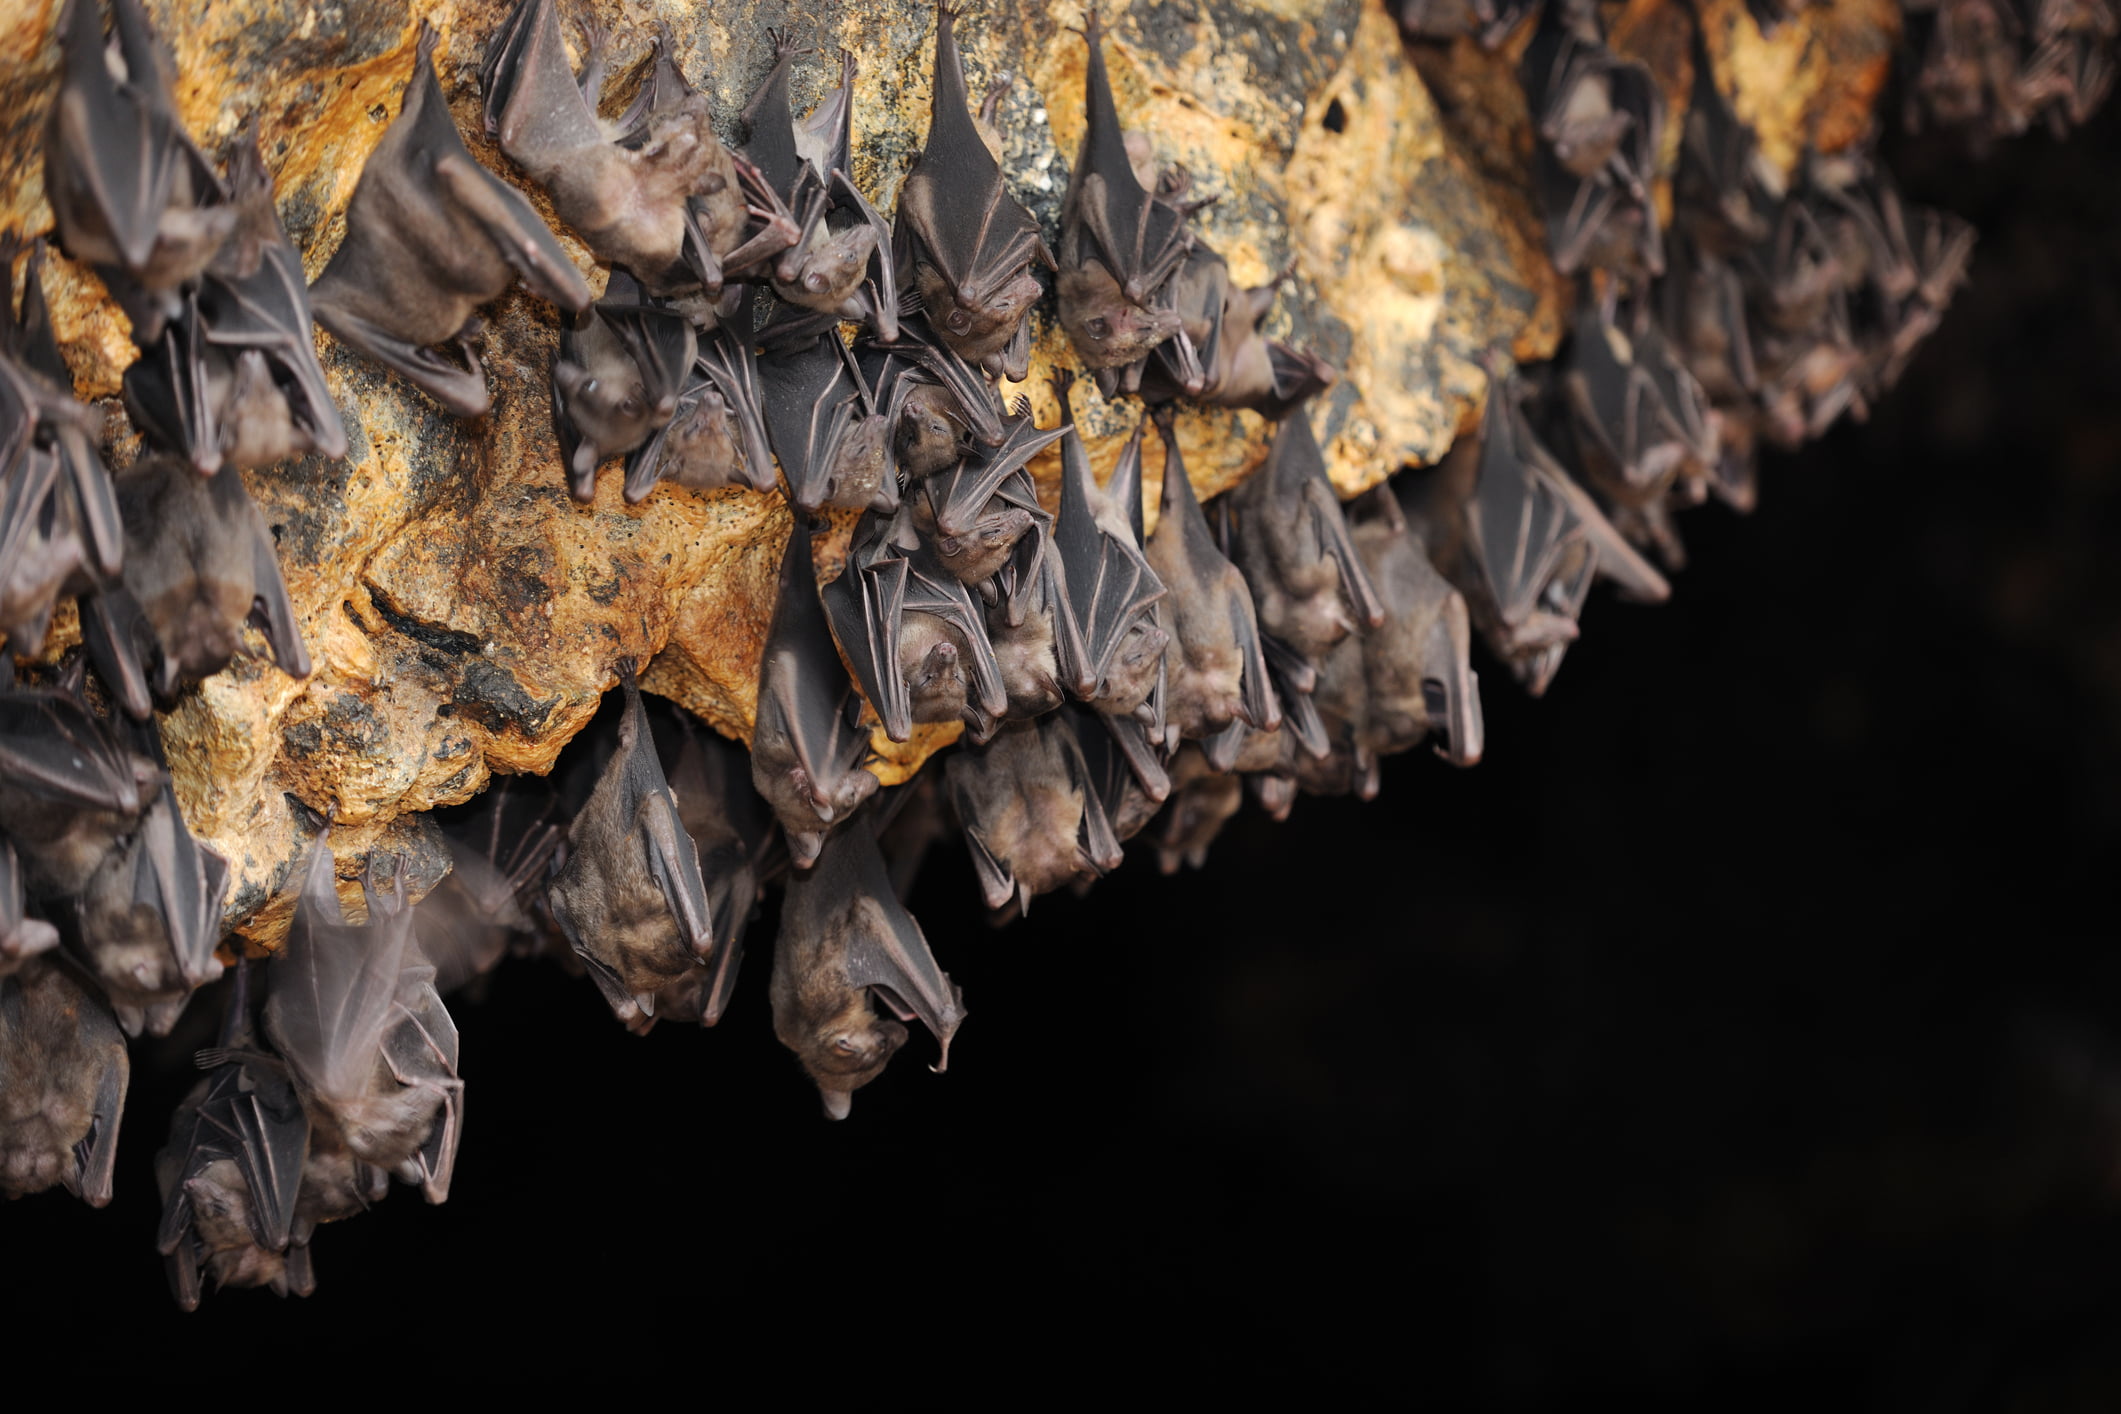 Huge Group of Bats in a Cave (XXXL)